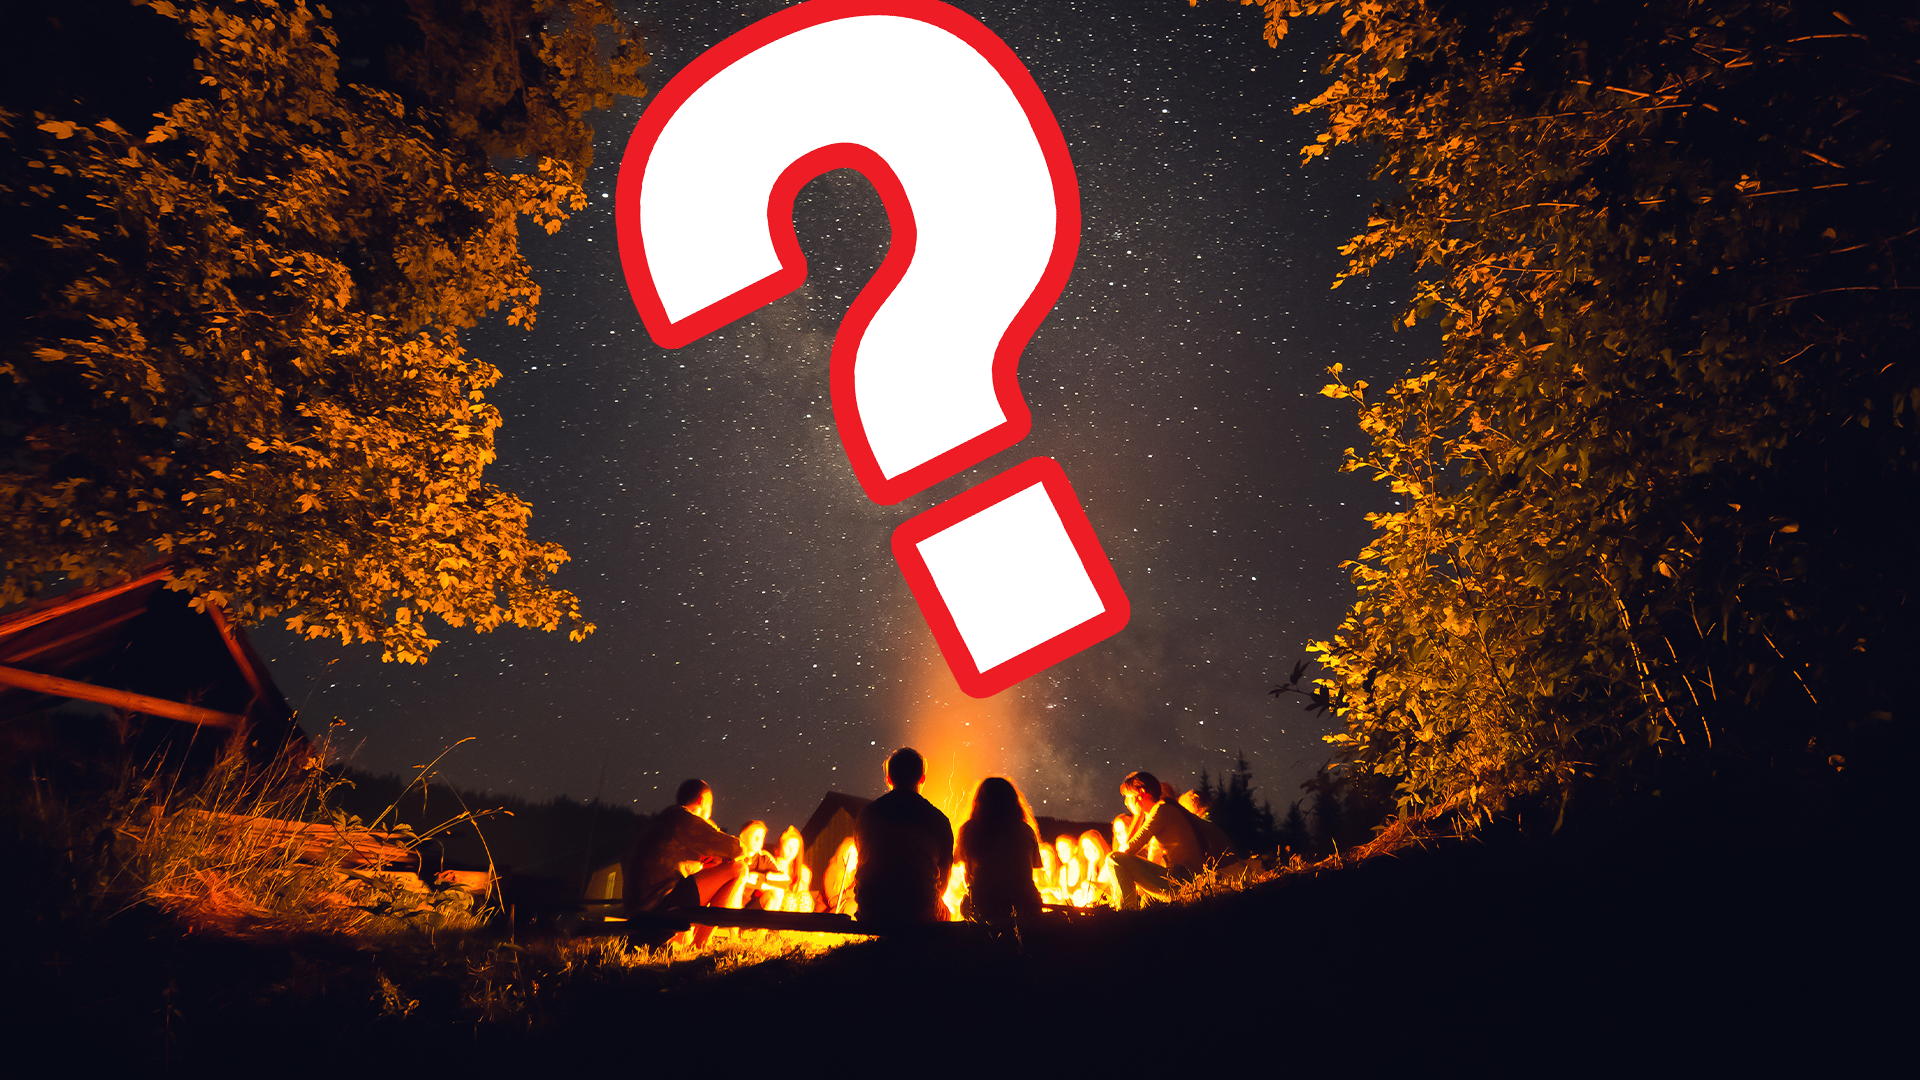 People sitting round a campfire at night with question mark